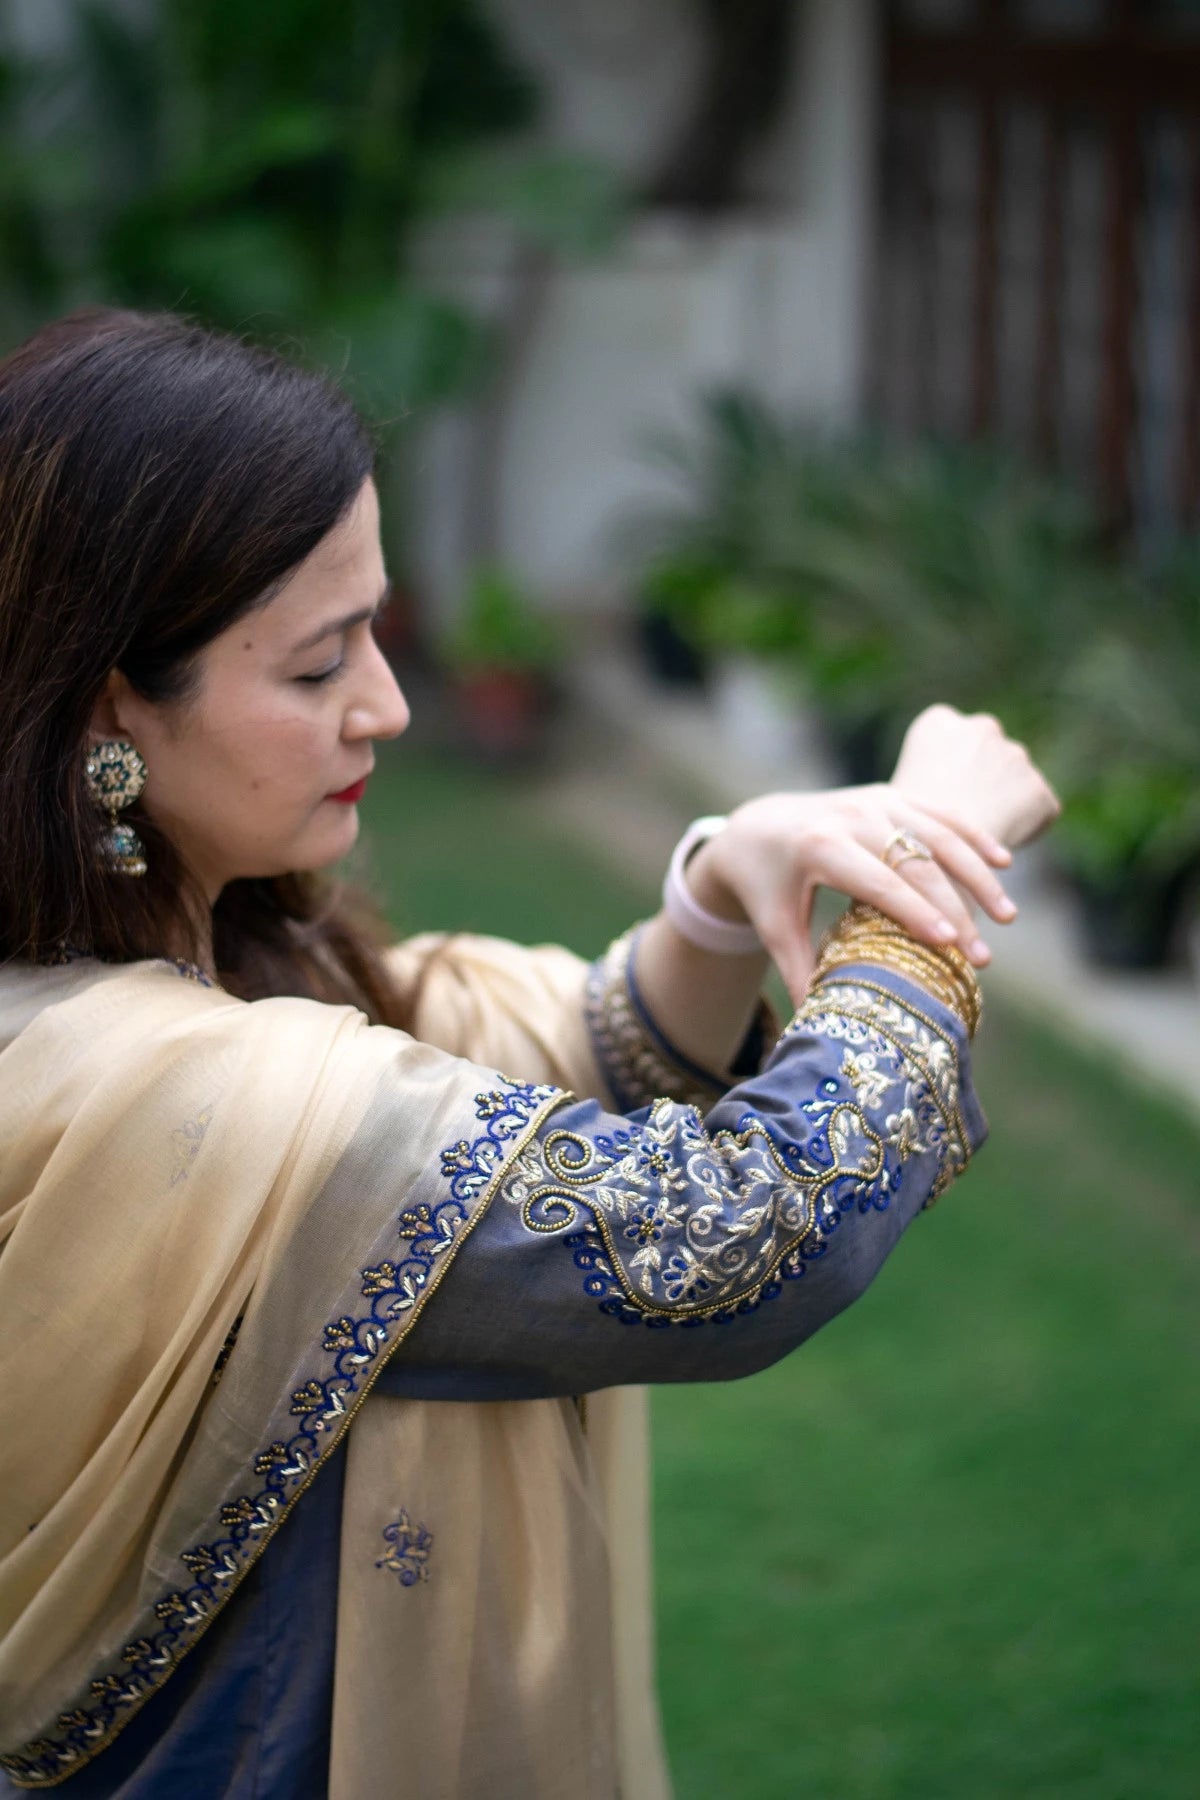 A beautiful ensemble featuring a blue kurta with gold zardozi work, a gold tissue dupatta, and matching palazzo pants worn by a woman with grace.